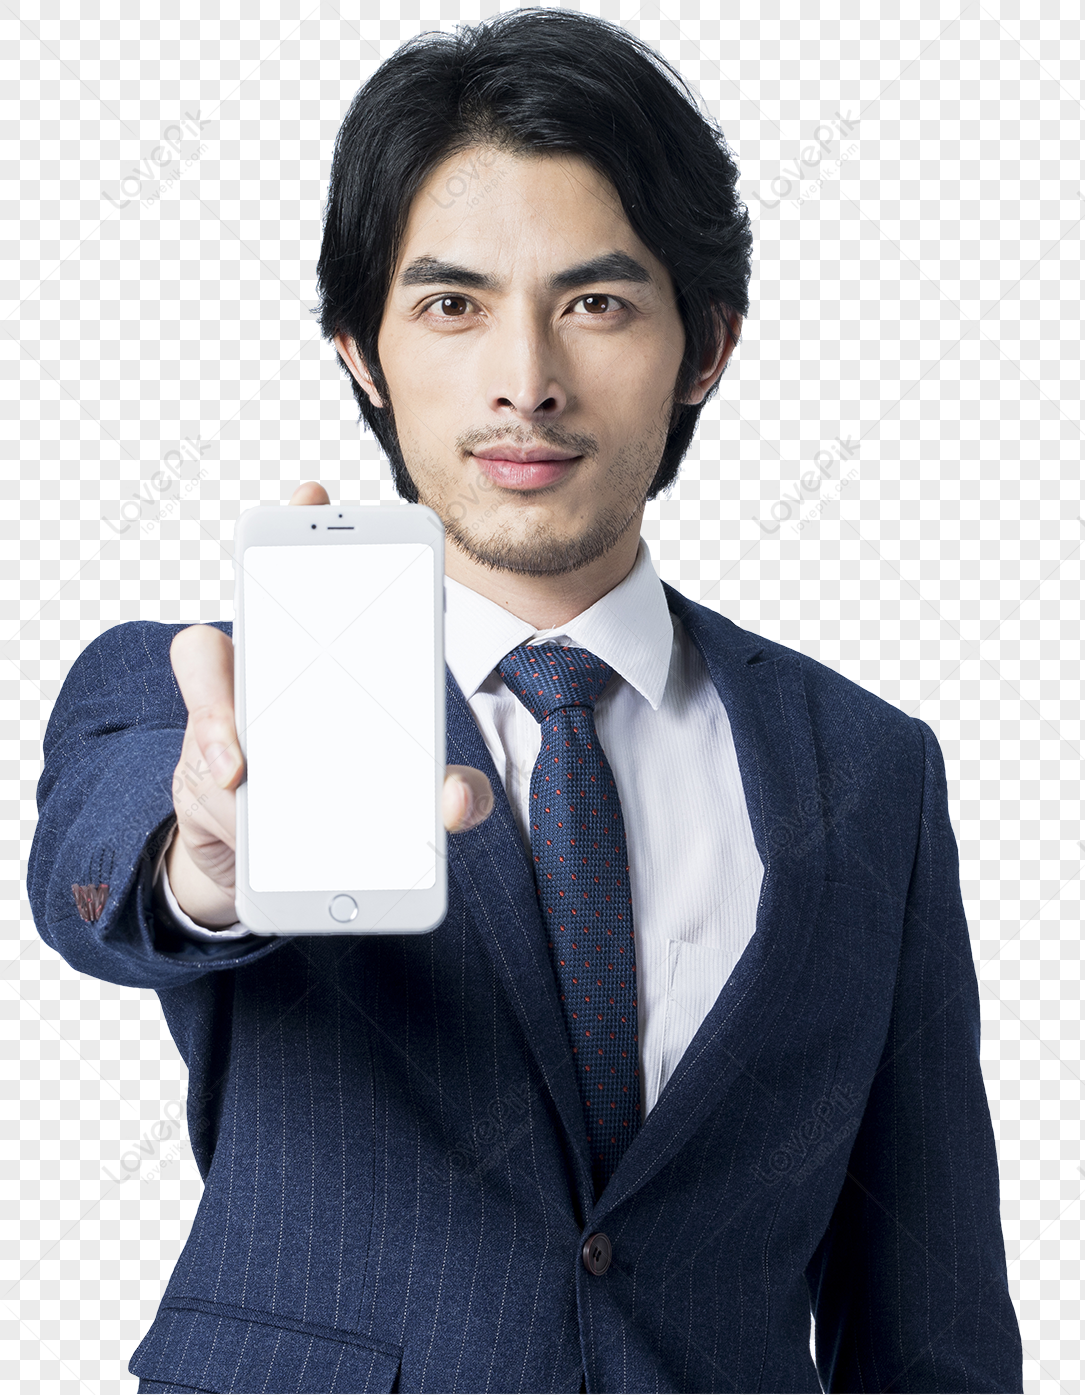 Suit PNG Images With Transparent Background